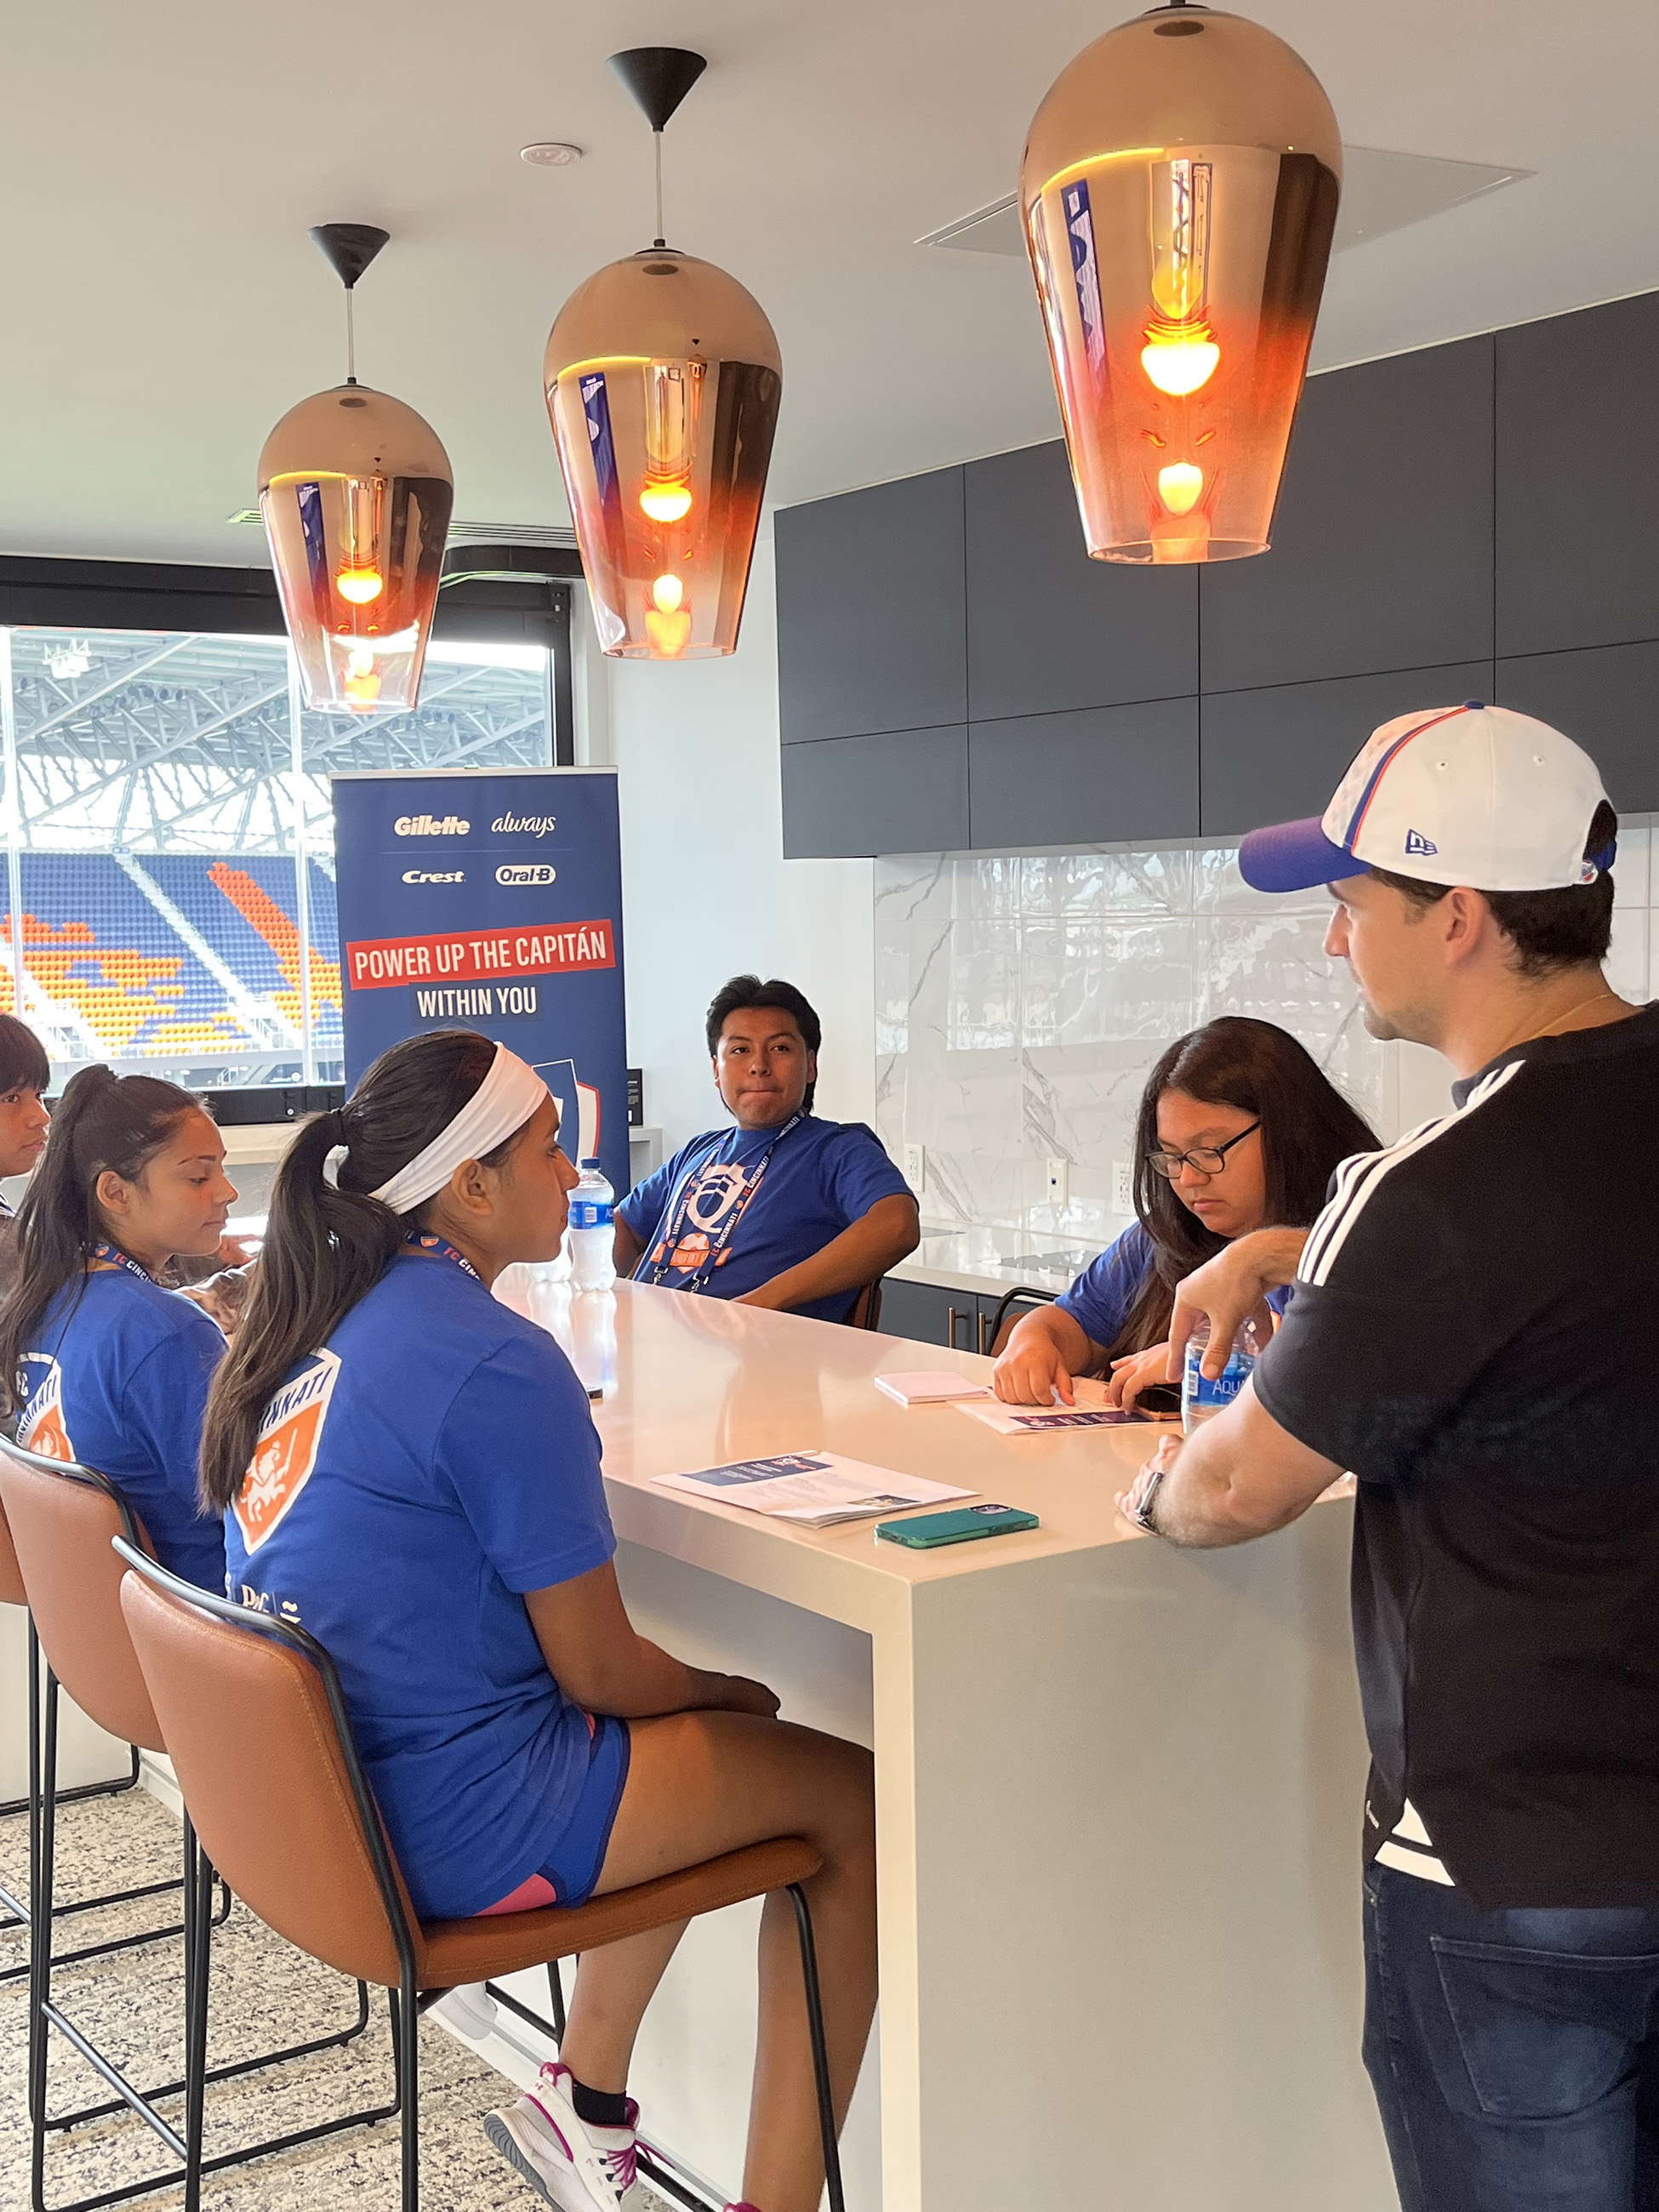 Latino students get behind-the-scenes perspective at a Capitanes del Futuro event hosted at the FC Cincinnati stadium.